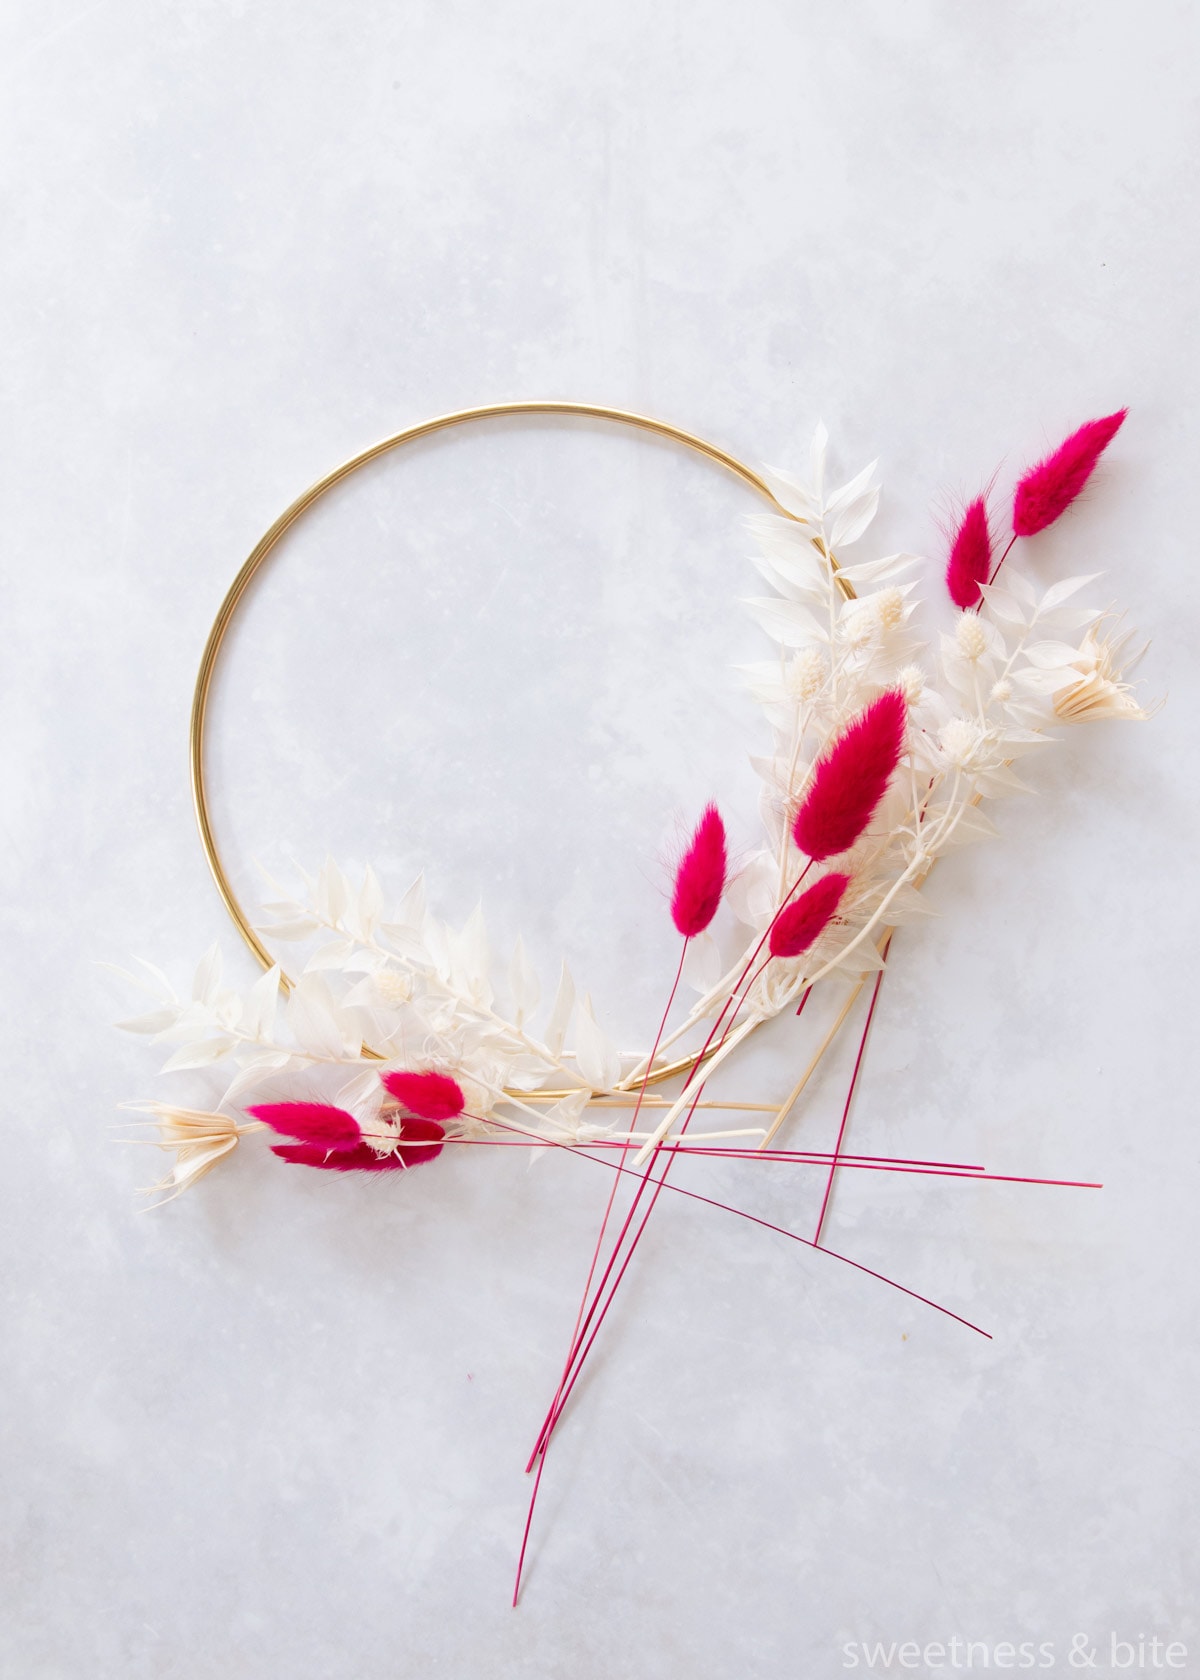 A gold hoop with white and pink preserved flowers and foliage arranged in a rough design.